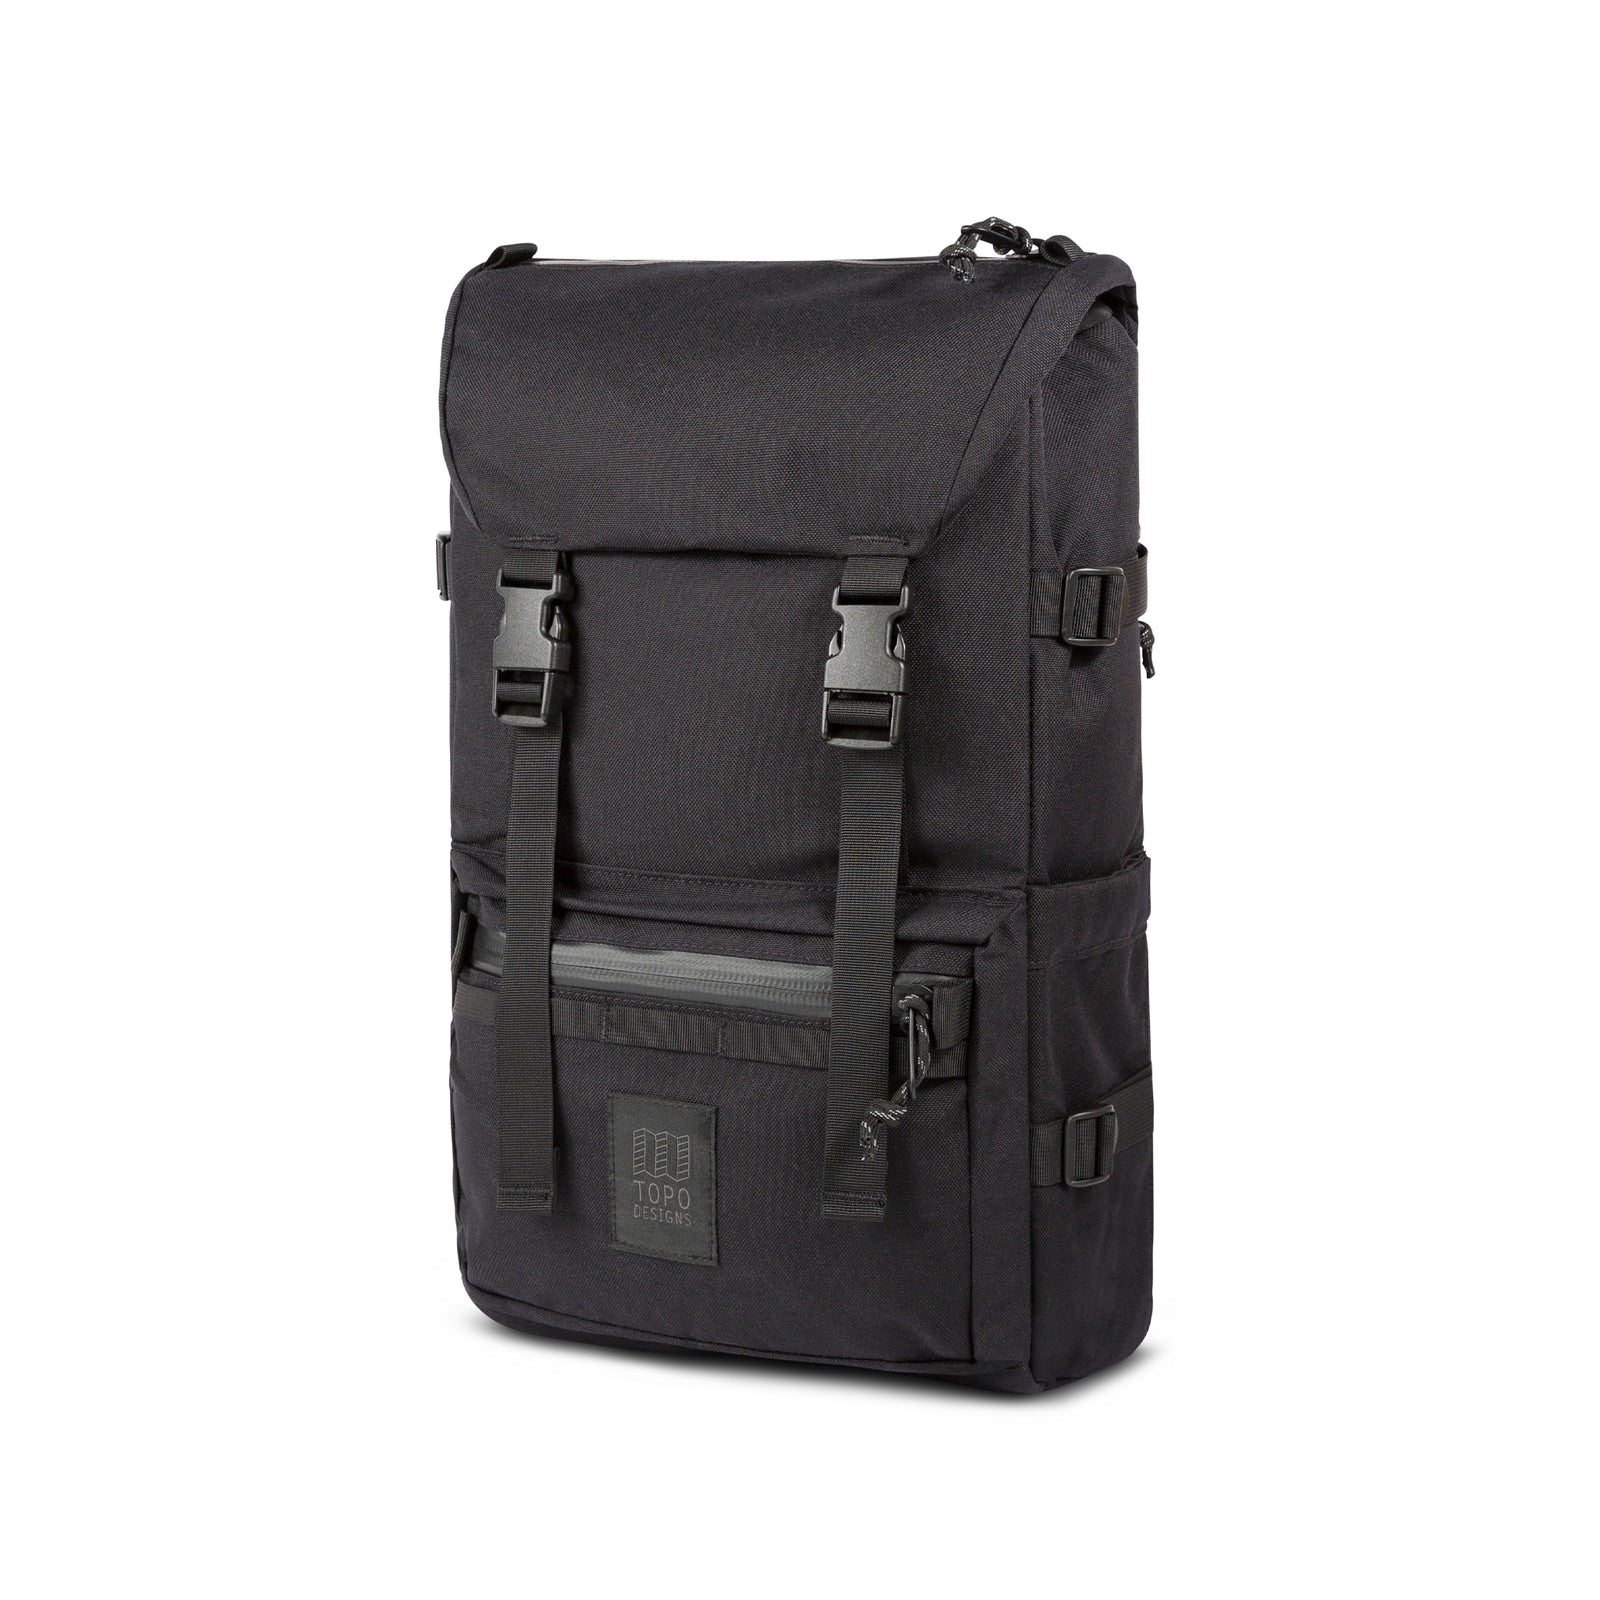 3/4 Front Product Shot of the Topo Designs Rover Pack Tech in "Black".